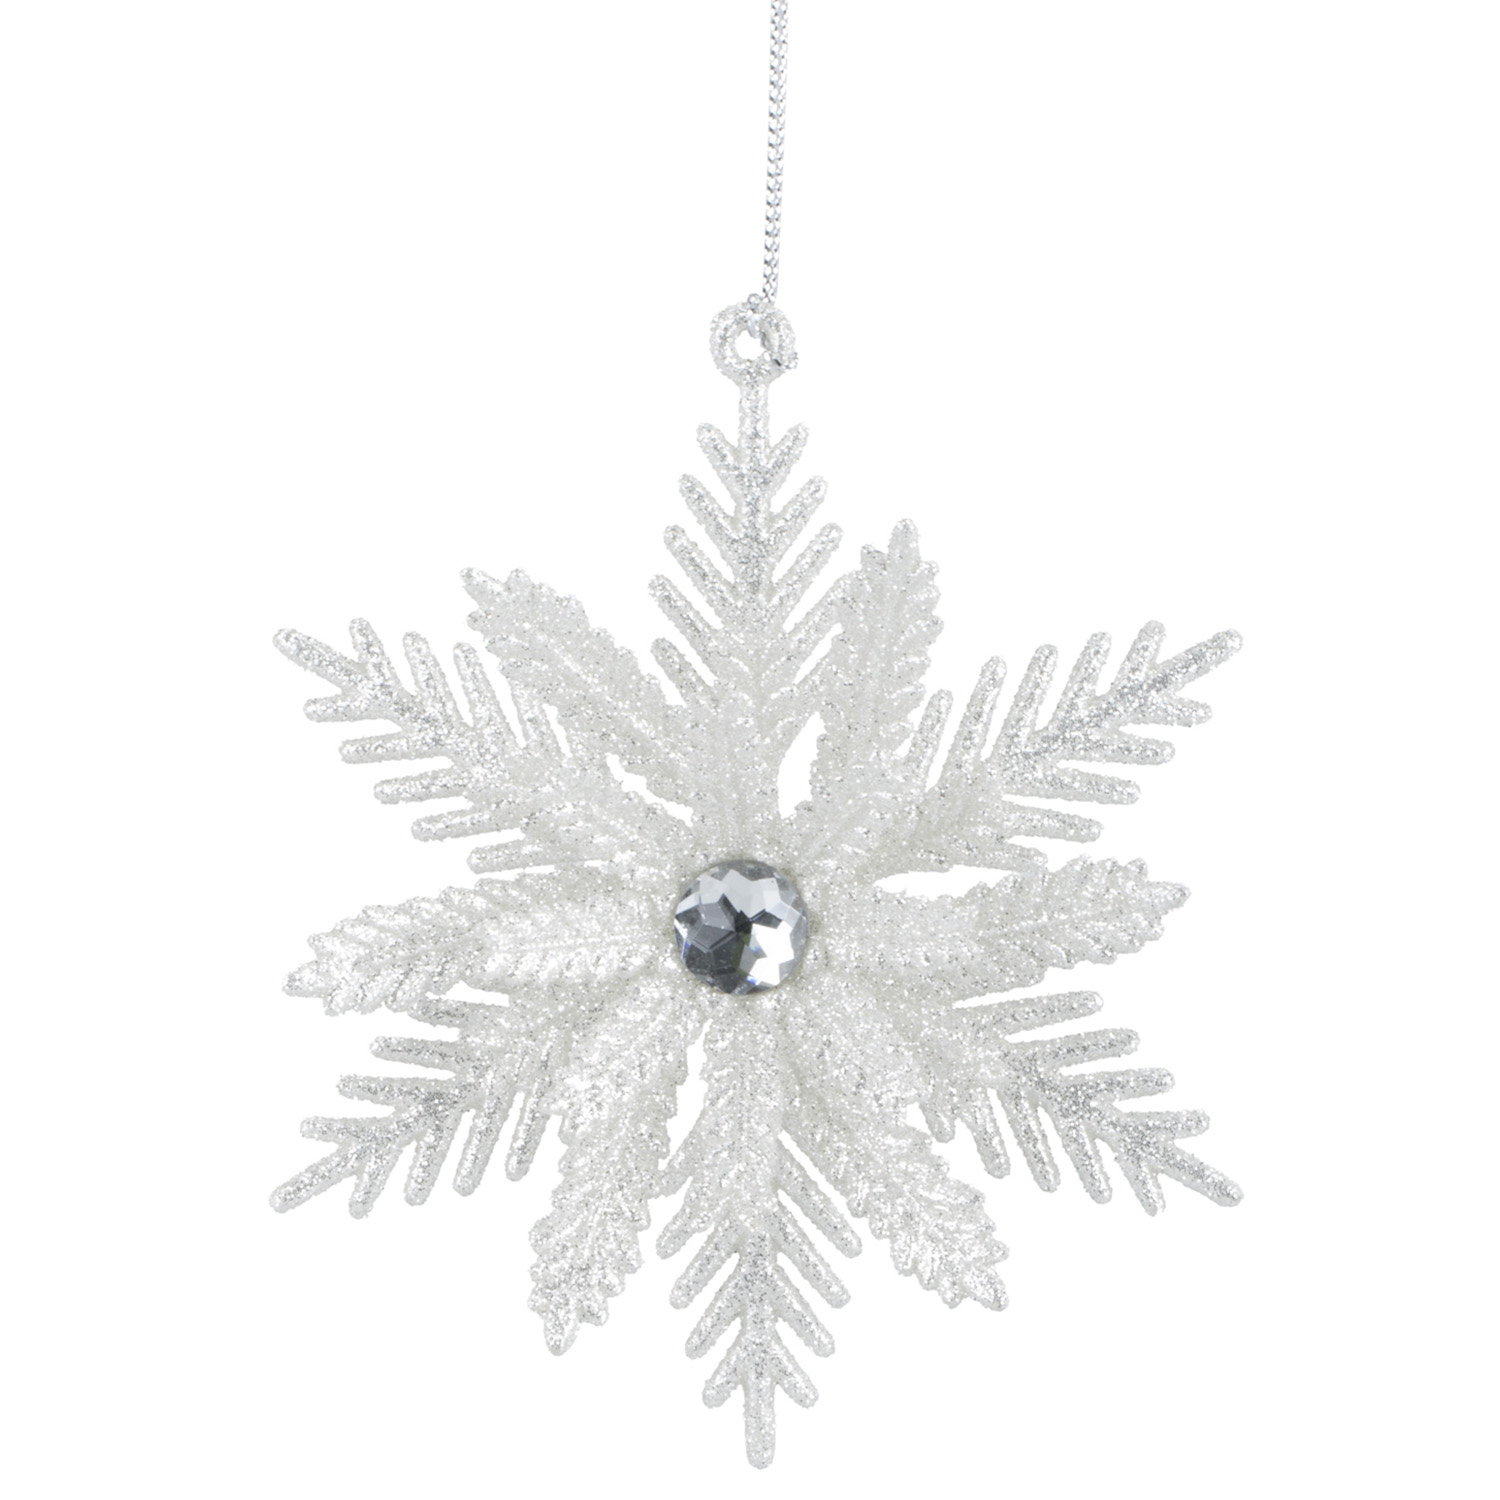 Frosted Fairytale Silver Snowflake Decoration Image